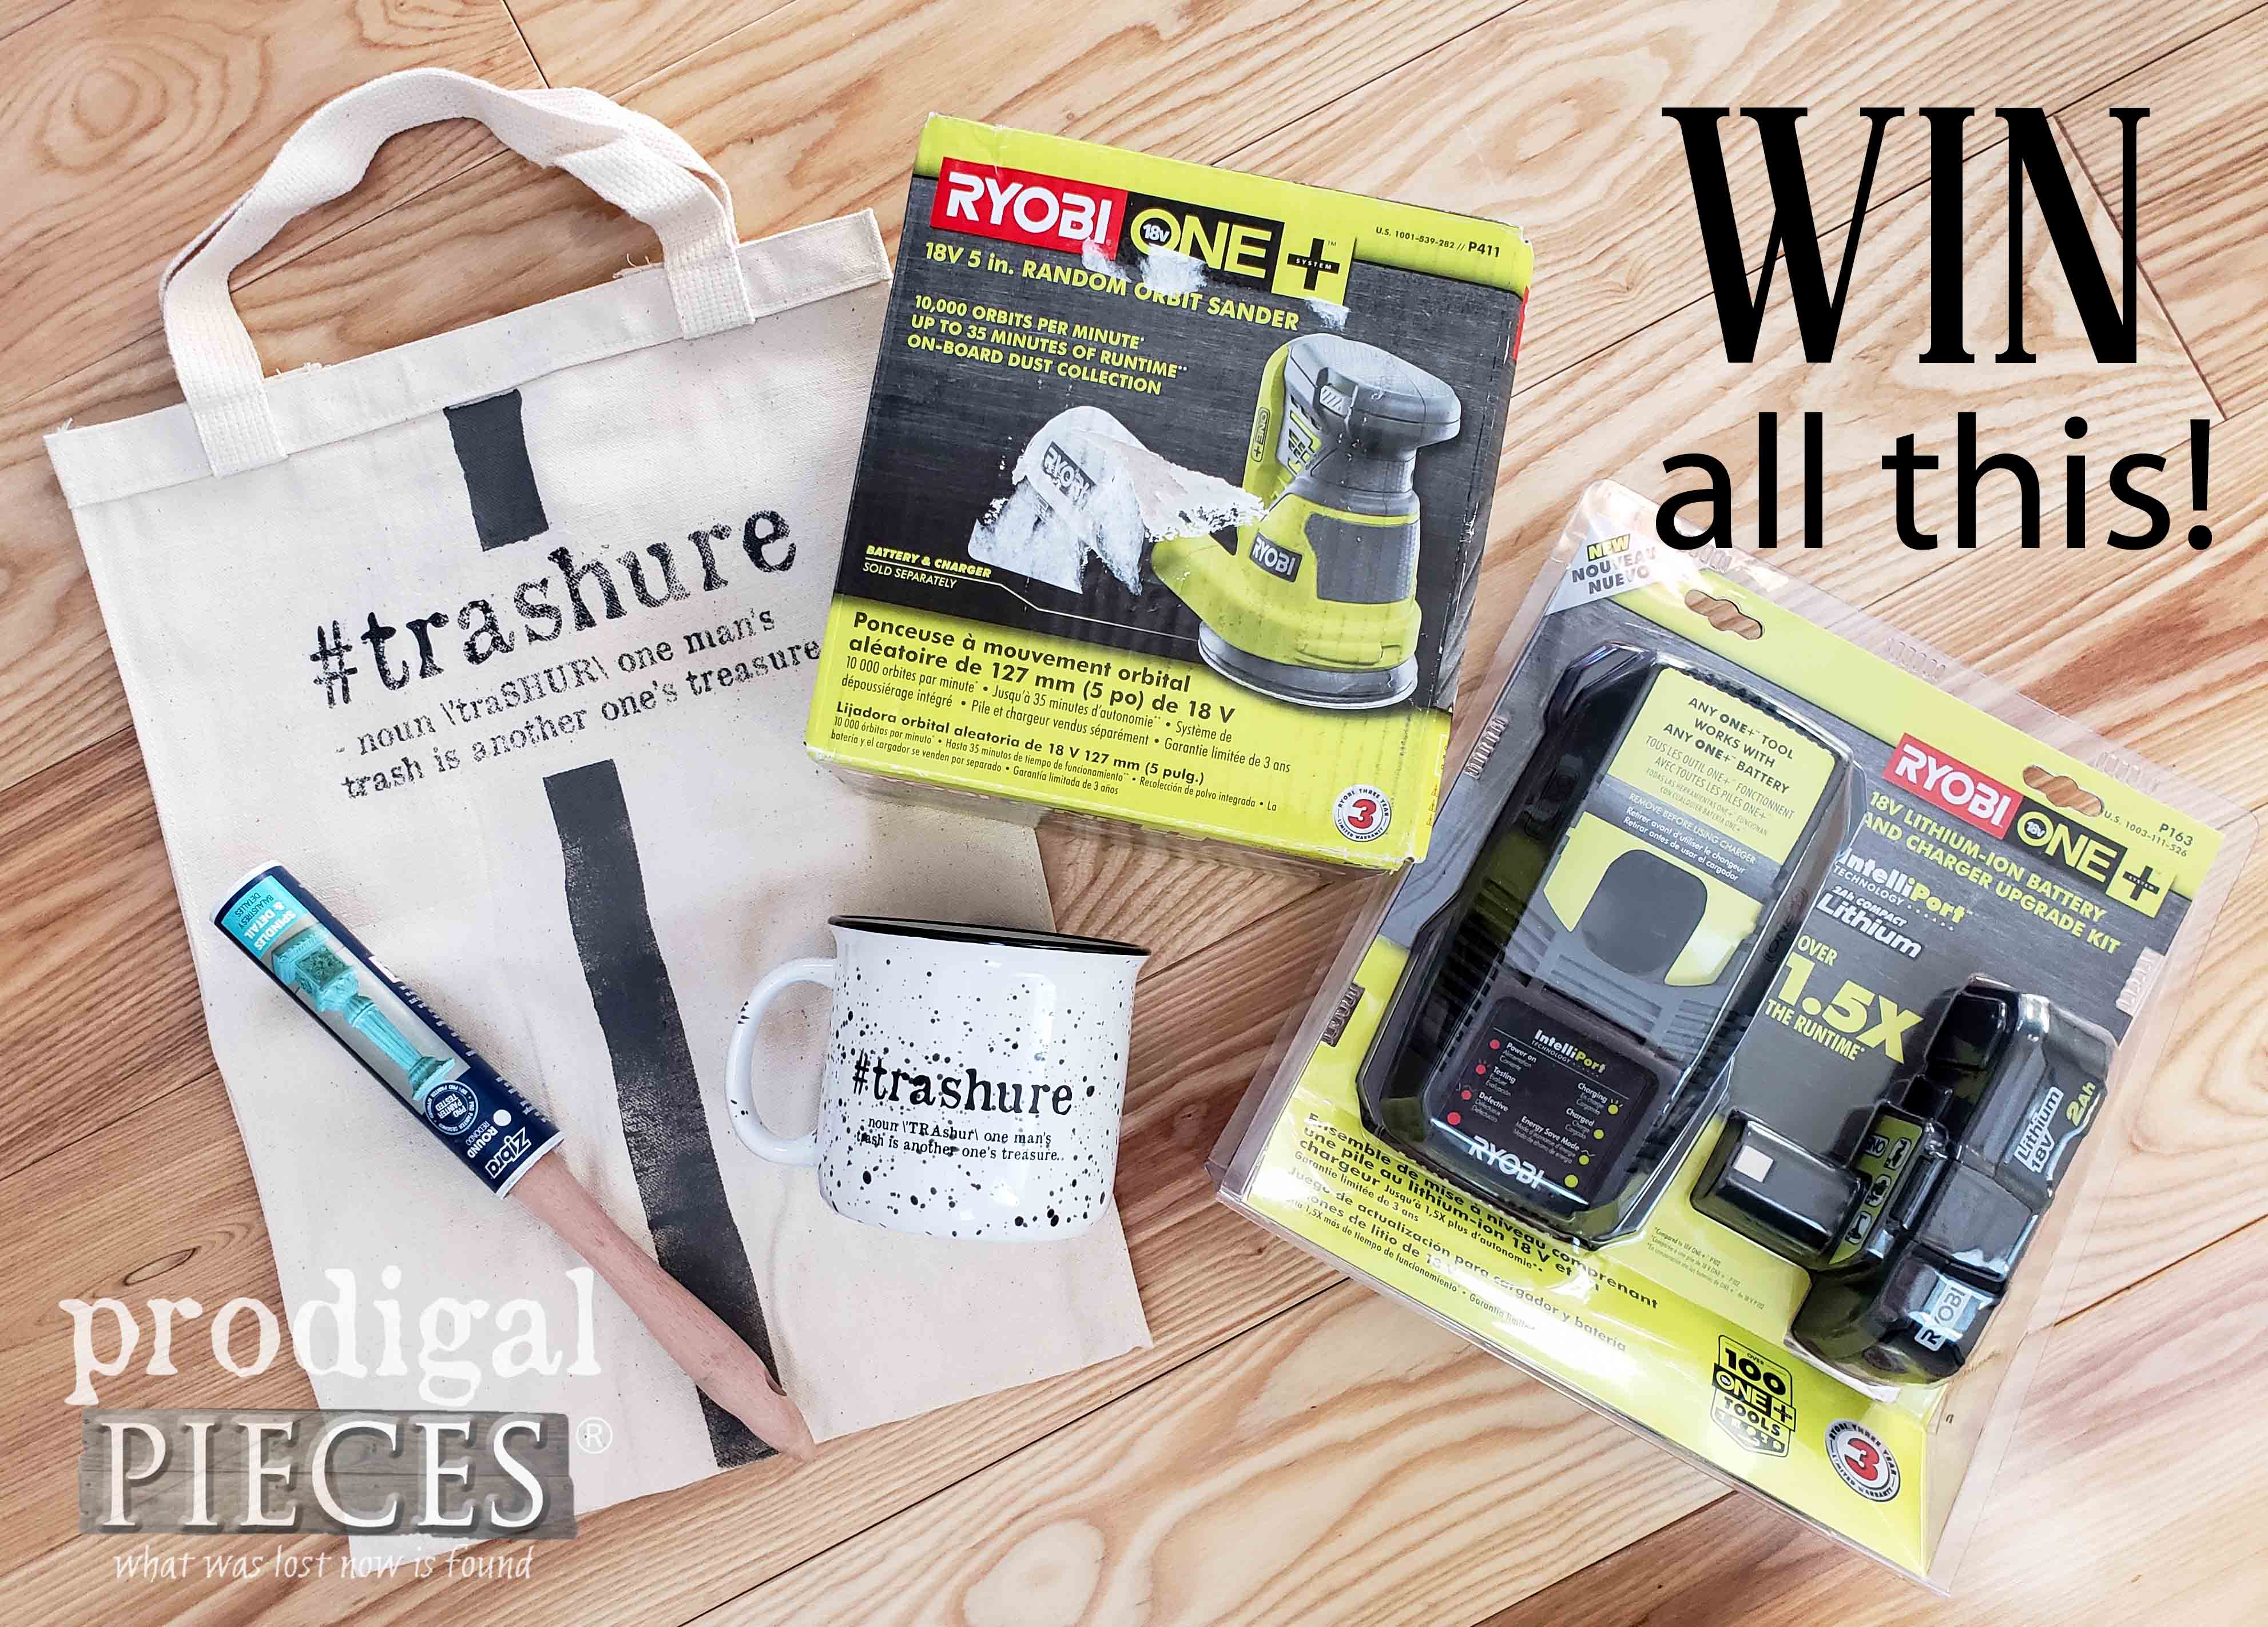 DIY Tools & Supplies Giveaway from Larissa of Prodigal Pieces | prodigalpieces.com #prodigalpieces #giveaway #tools #diy #home #homedecor #homedecorideas